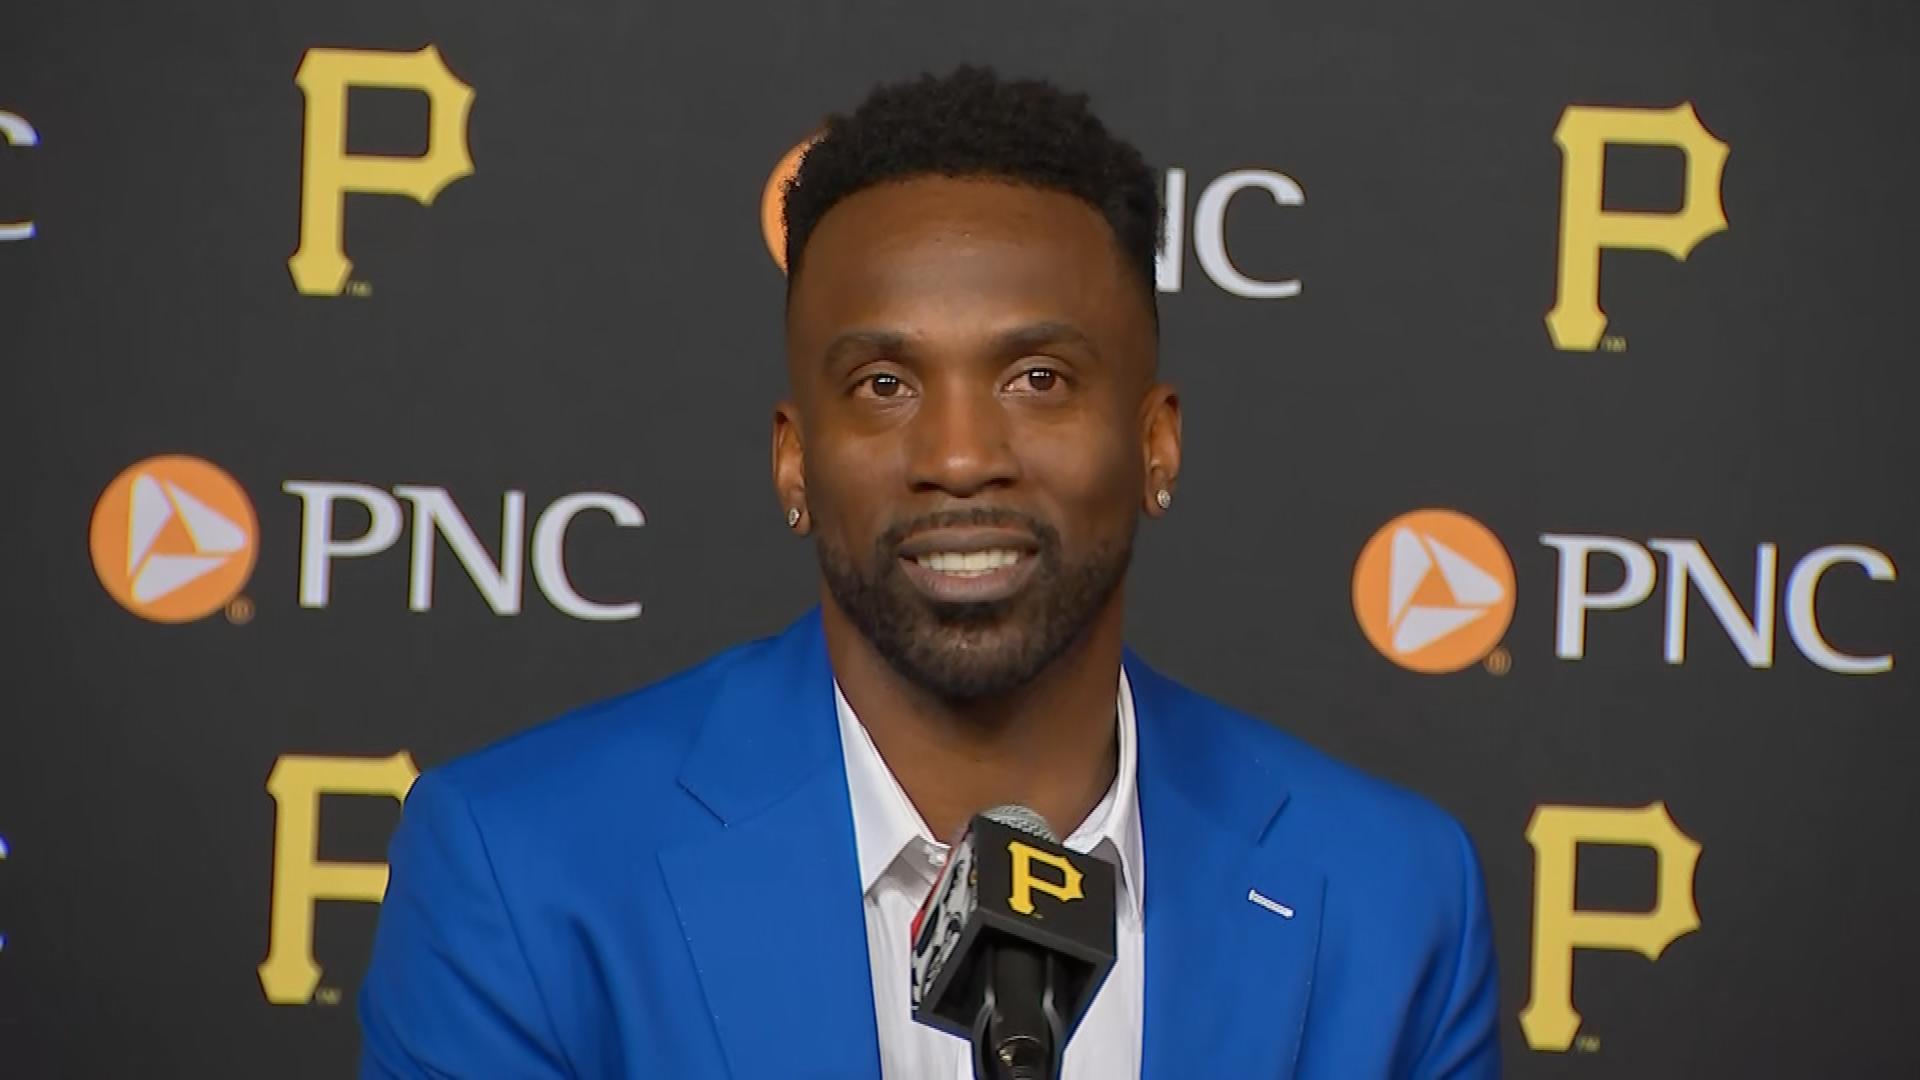 Report: Andrew McCutchen returning to Pirates on 1-year deal - NBC